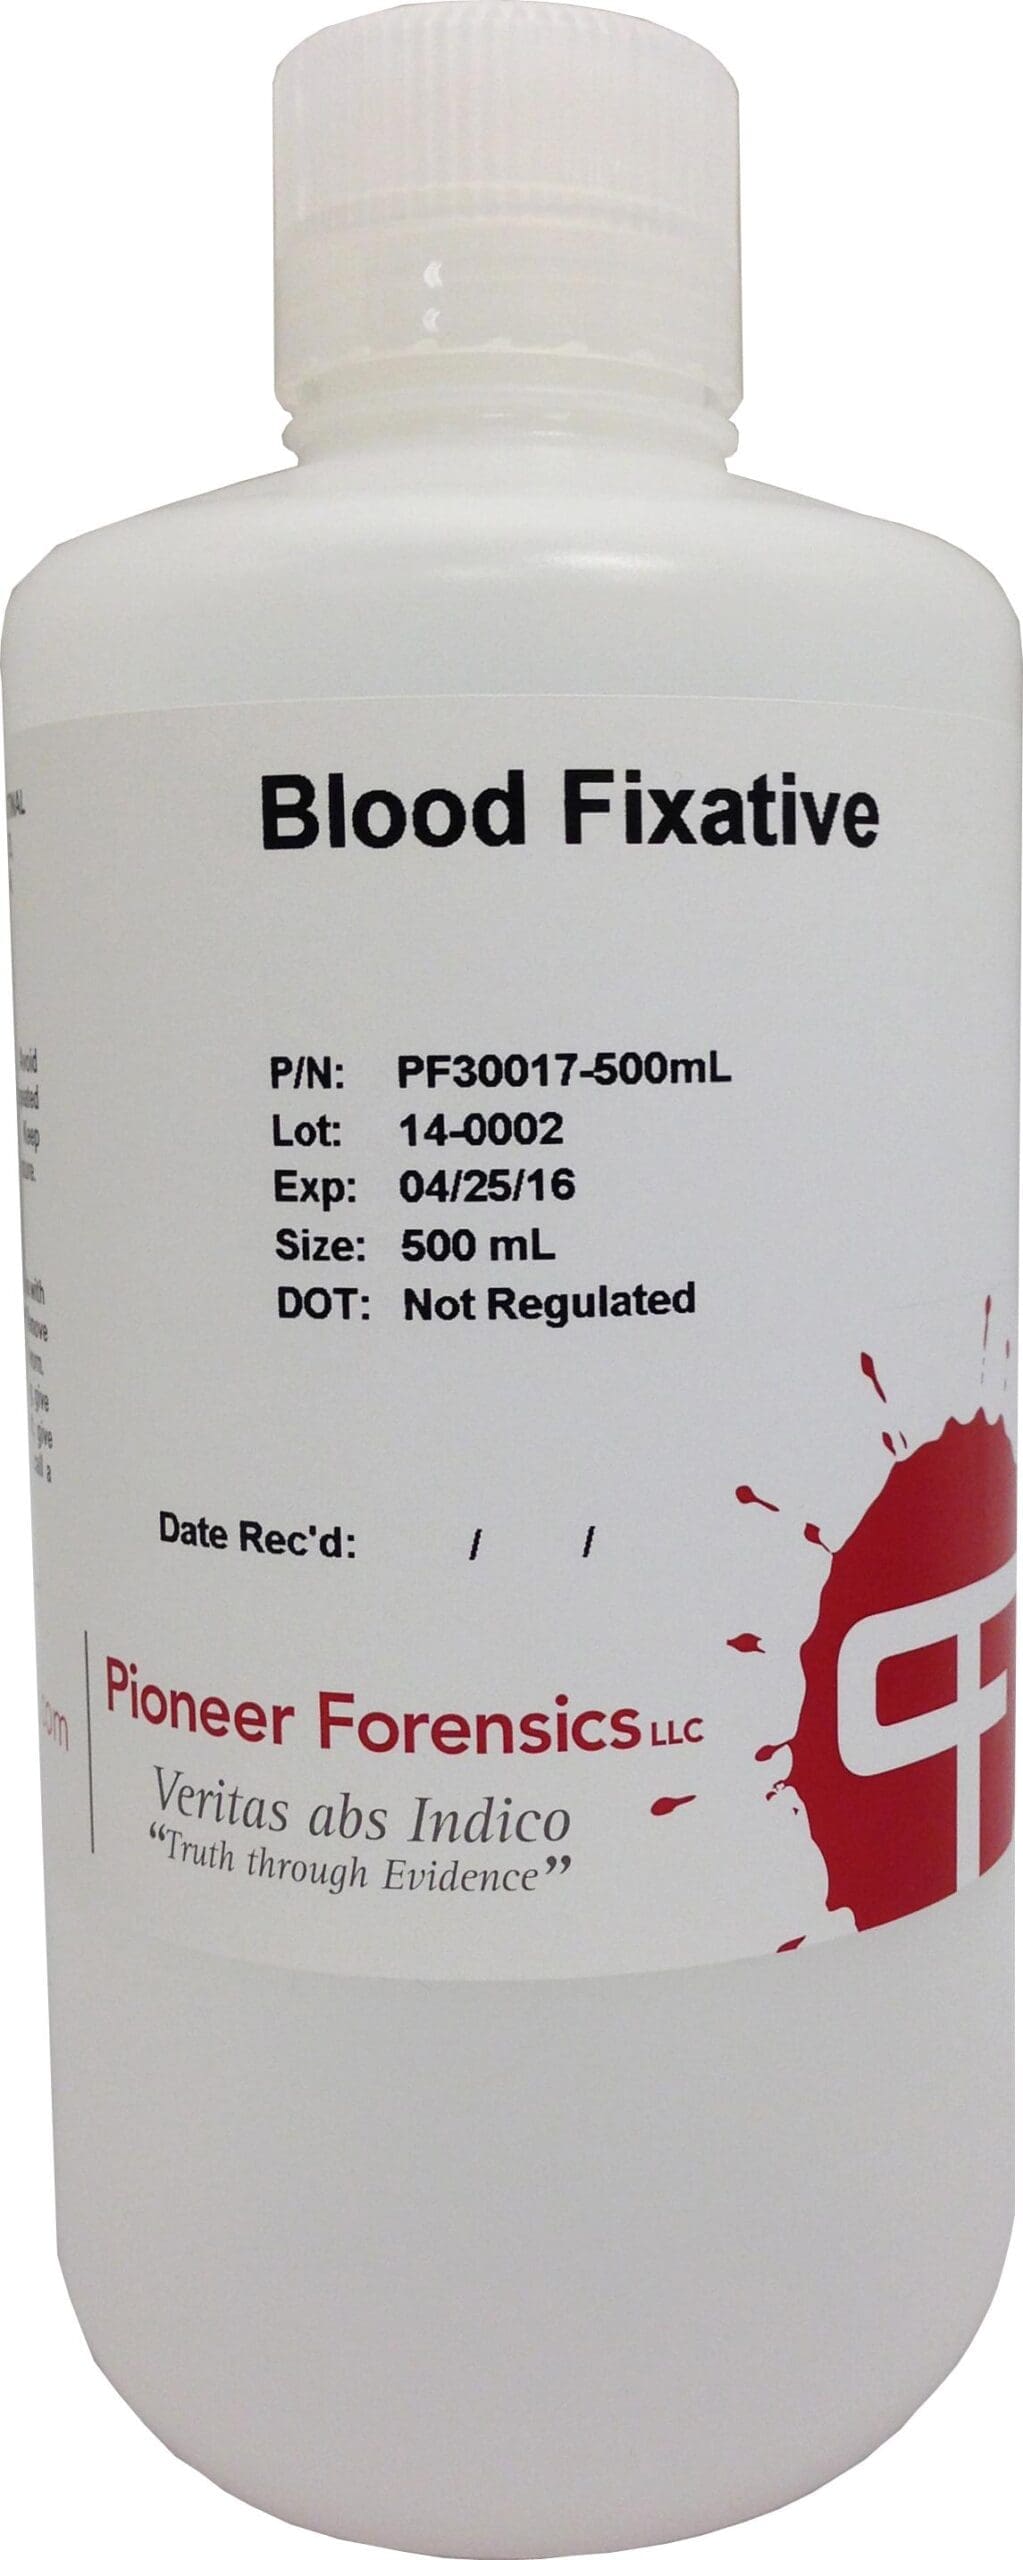 Blood Fixative is highly recommended for setting fingerprints or impressions left in blood